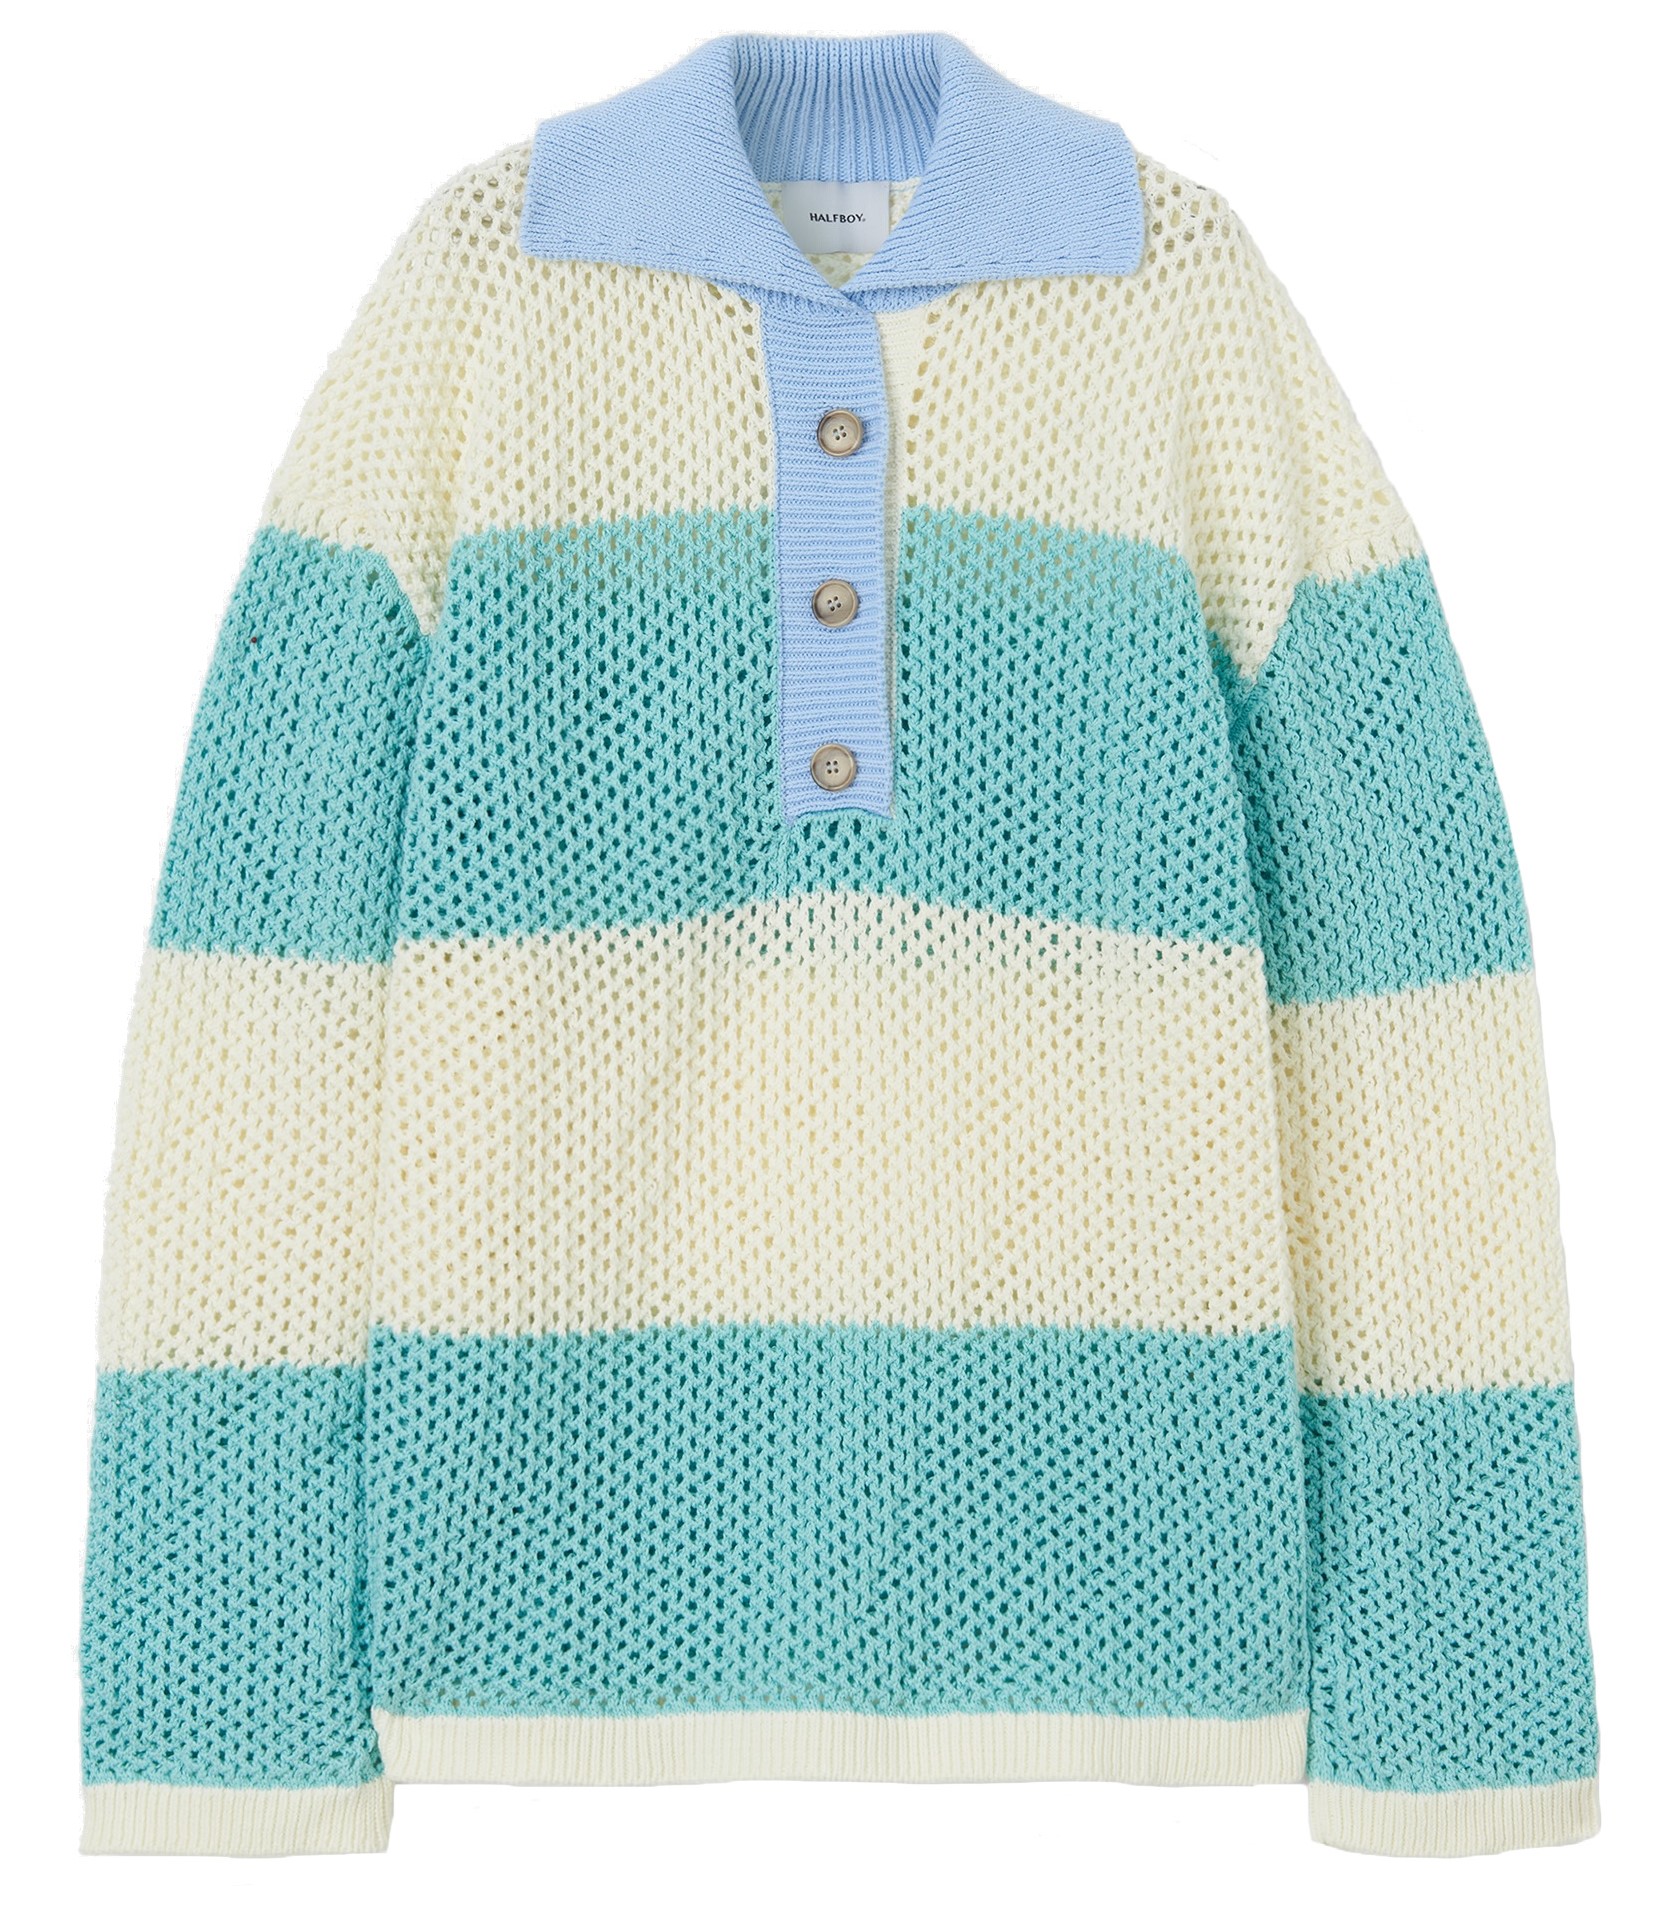 HALFBOY Striped Polo Knit Sweater